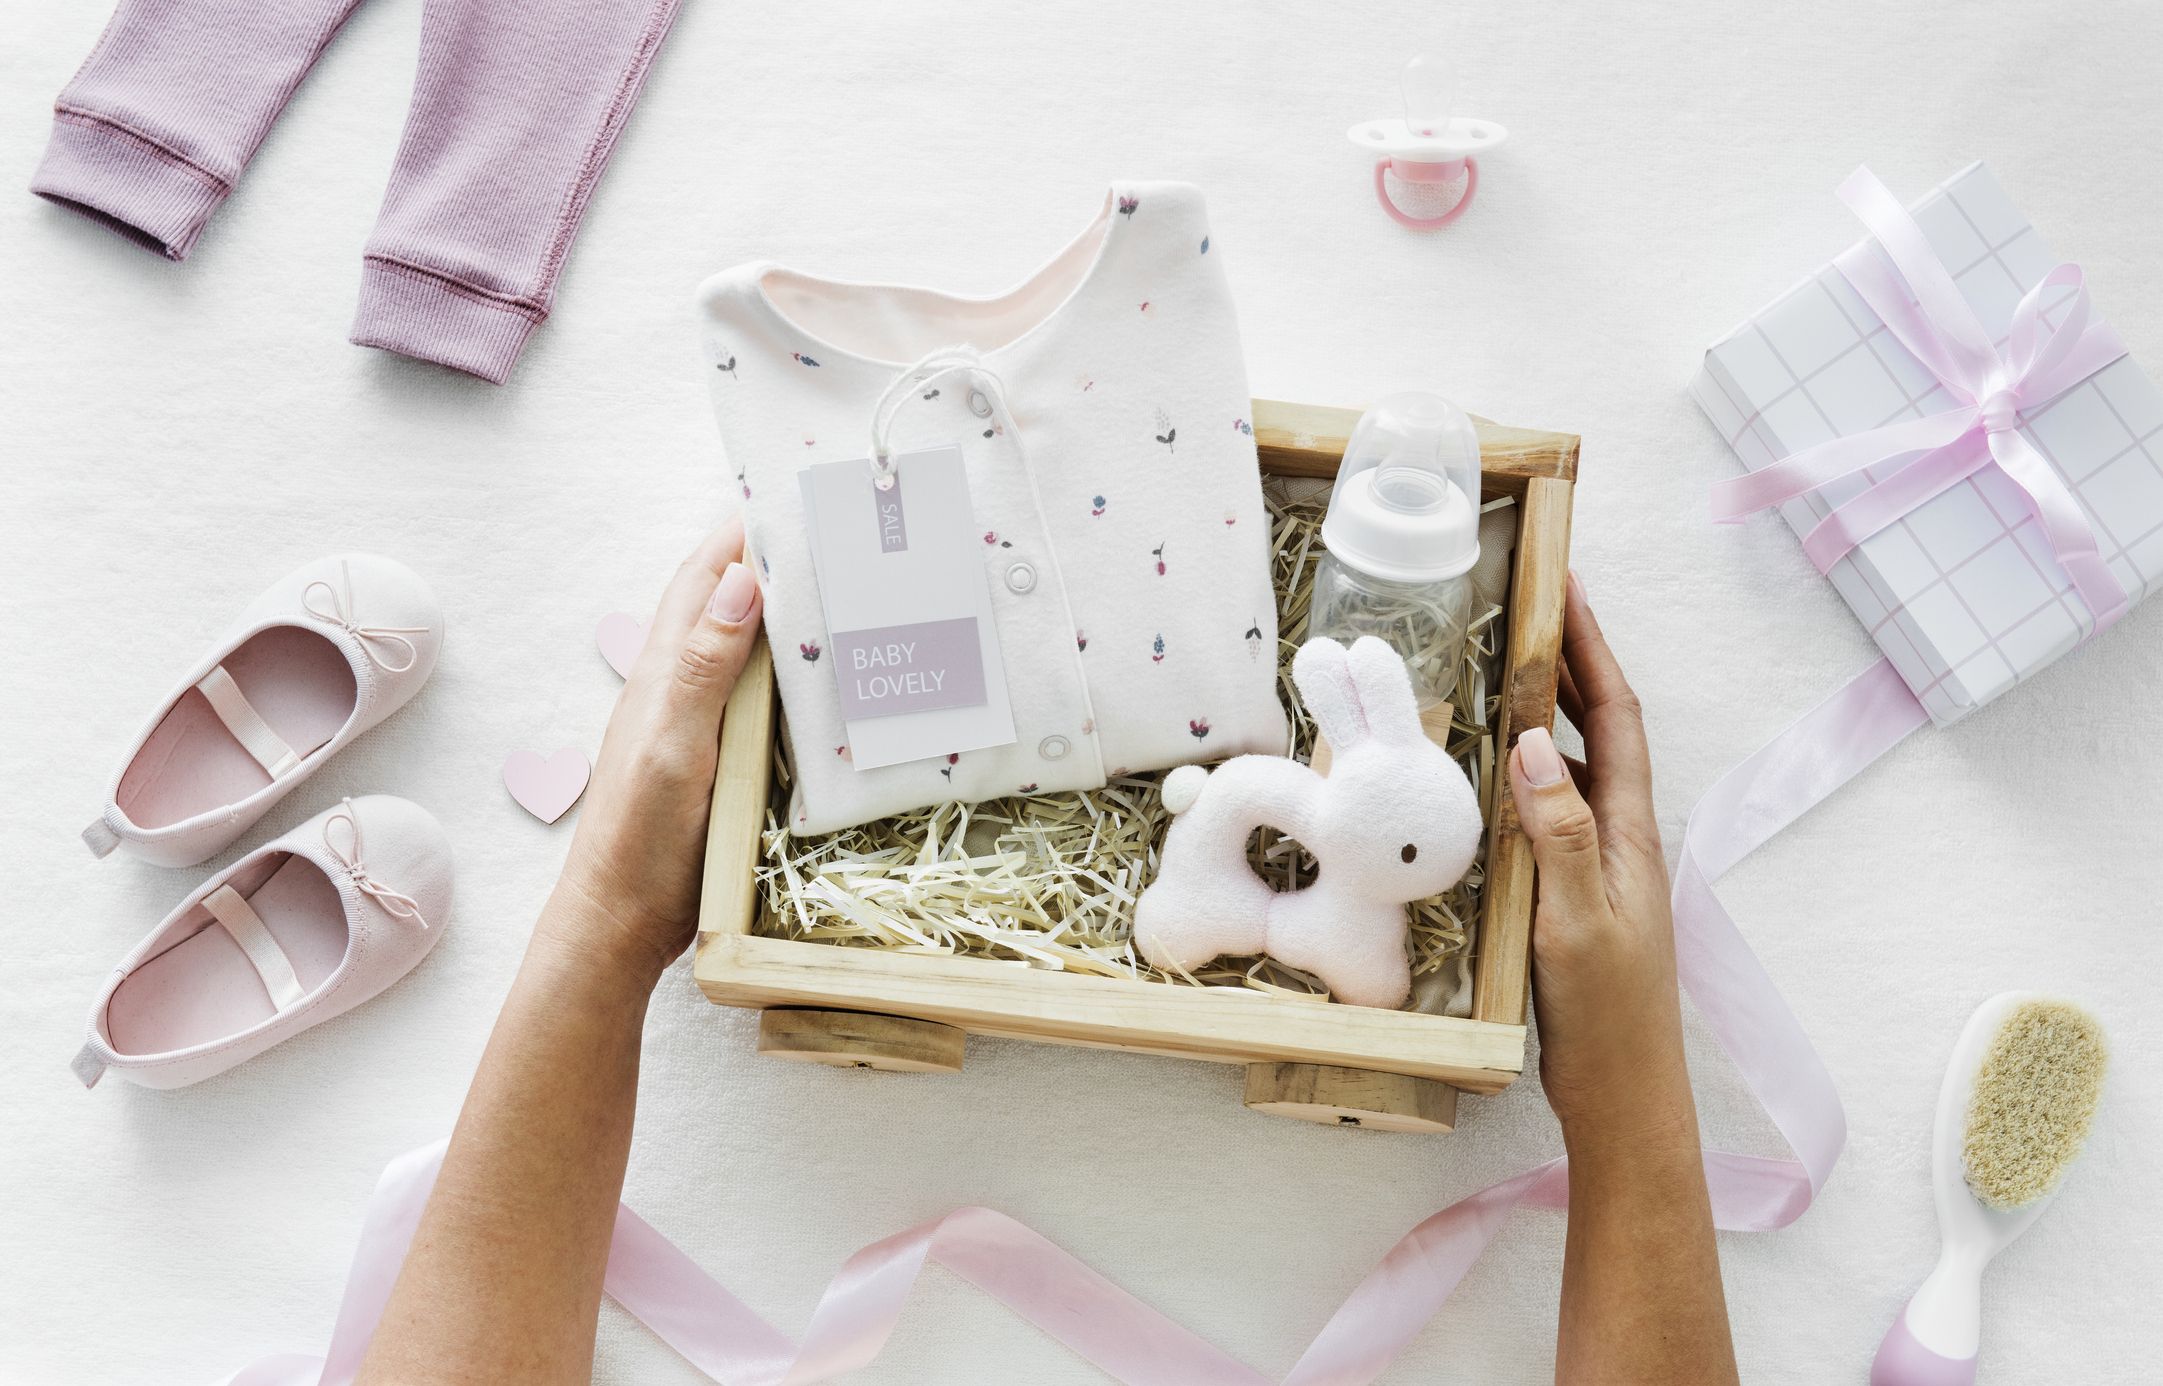 Things You Can Add In A New Born’s Gift Basket